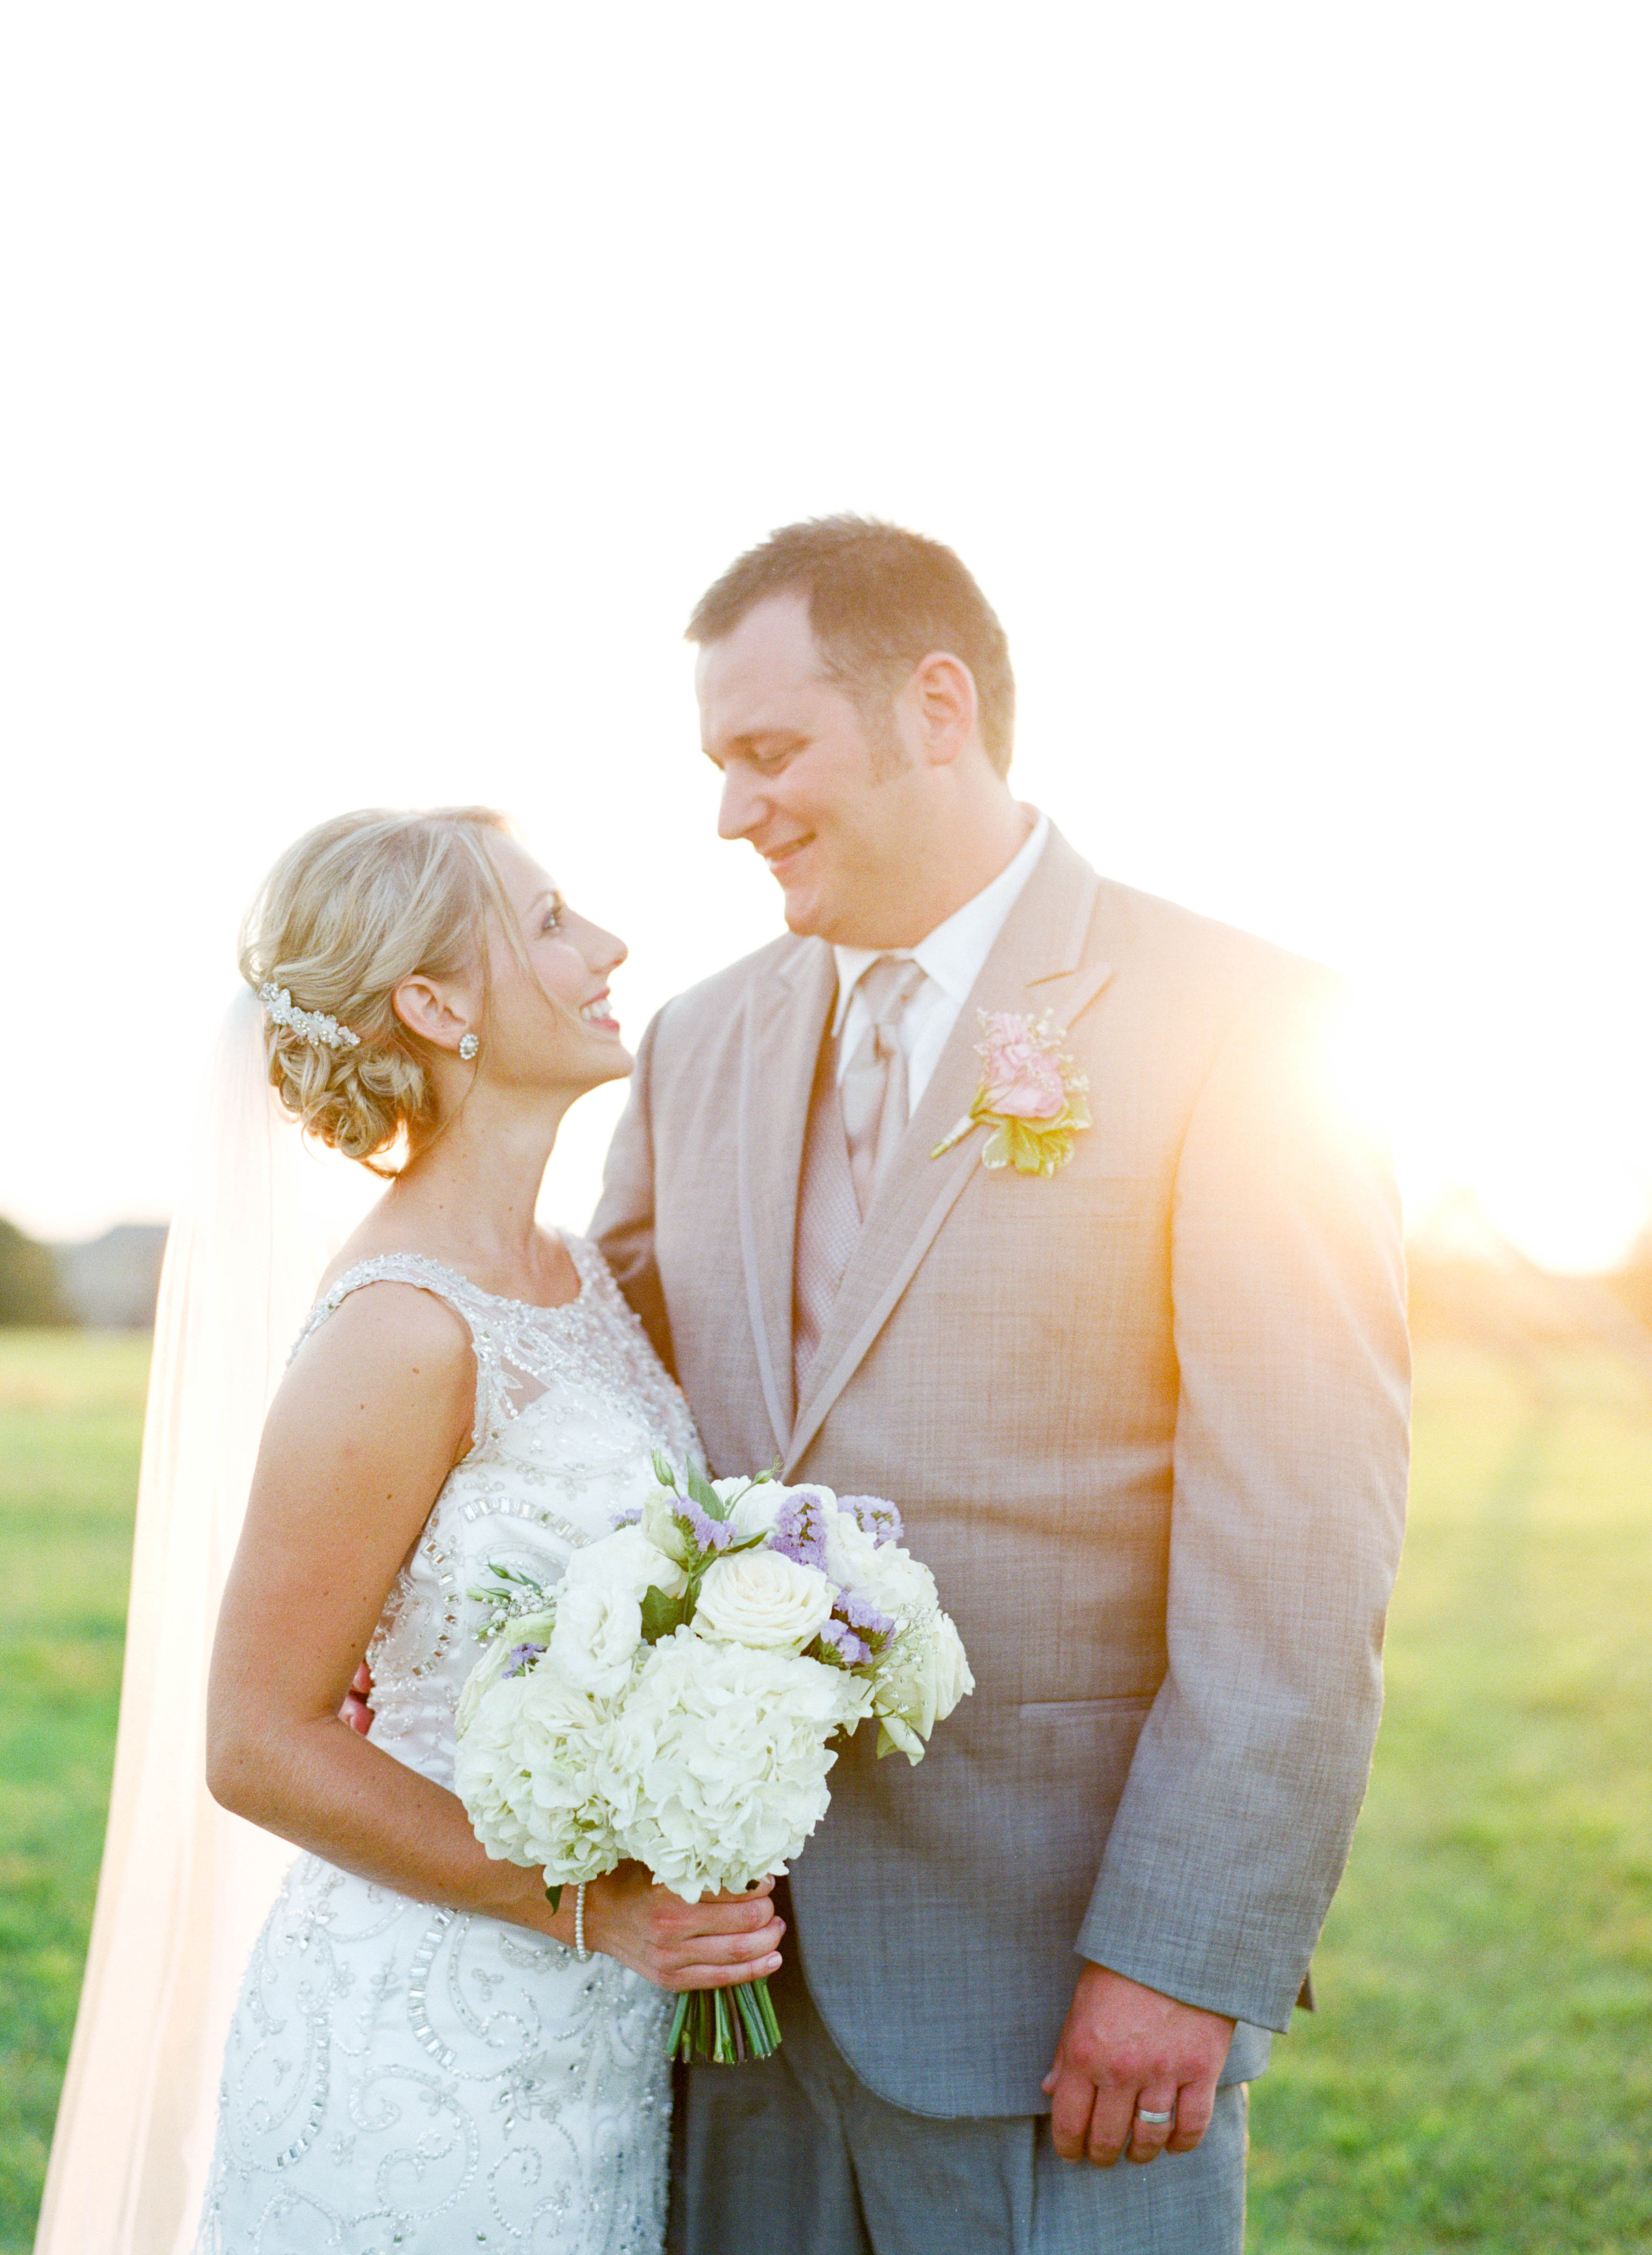 View More: http://tulleandgrace.pass.us/stacy-wedding